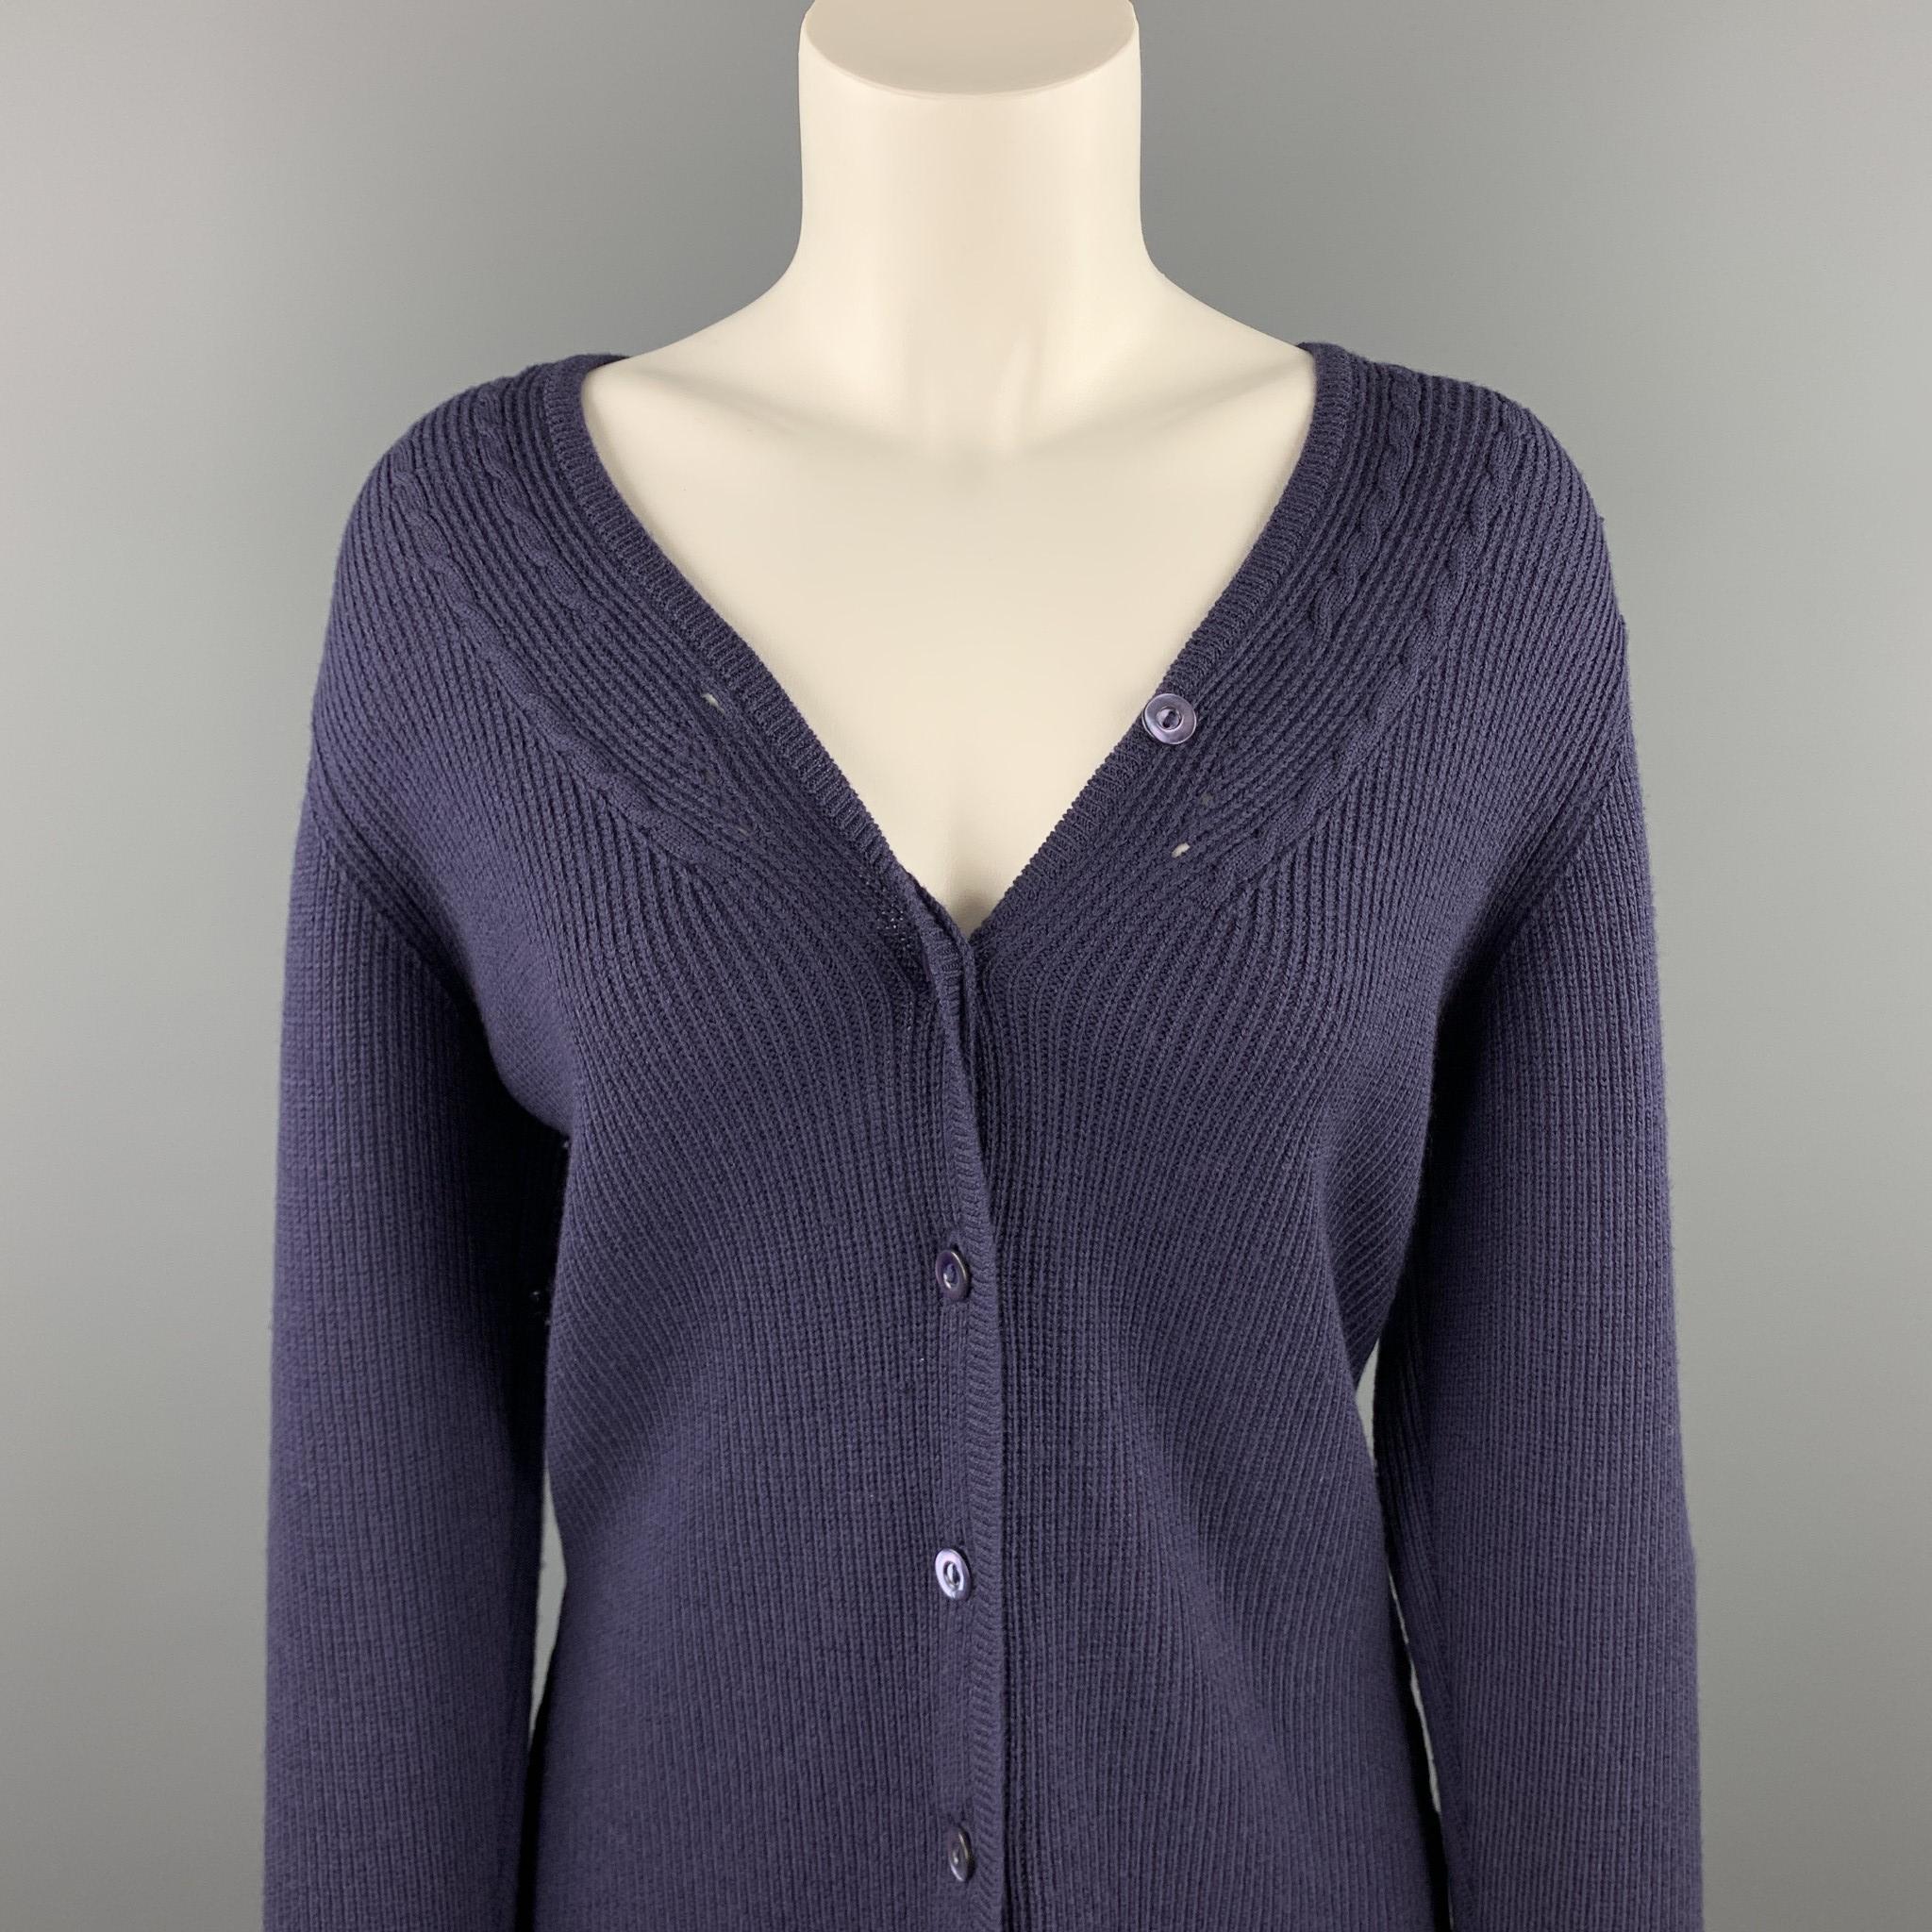 JAEGER cardigan comes in a navy ribbed merino wool featuring a buttoned closure. Made in England.

Very Good Pre-Owned Condition.
Marked: M

Measurements:

Shoulder: 15.5 in. 
Bust: 37 in. 
Sleeve: 26 in. 
Length: 25 in. 